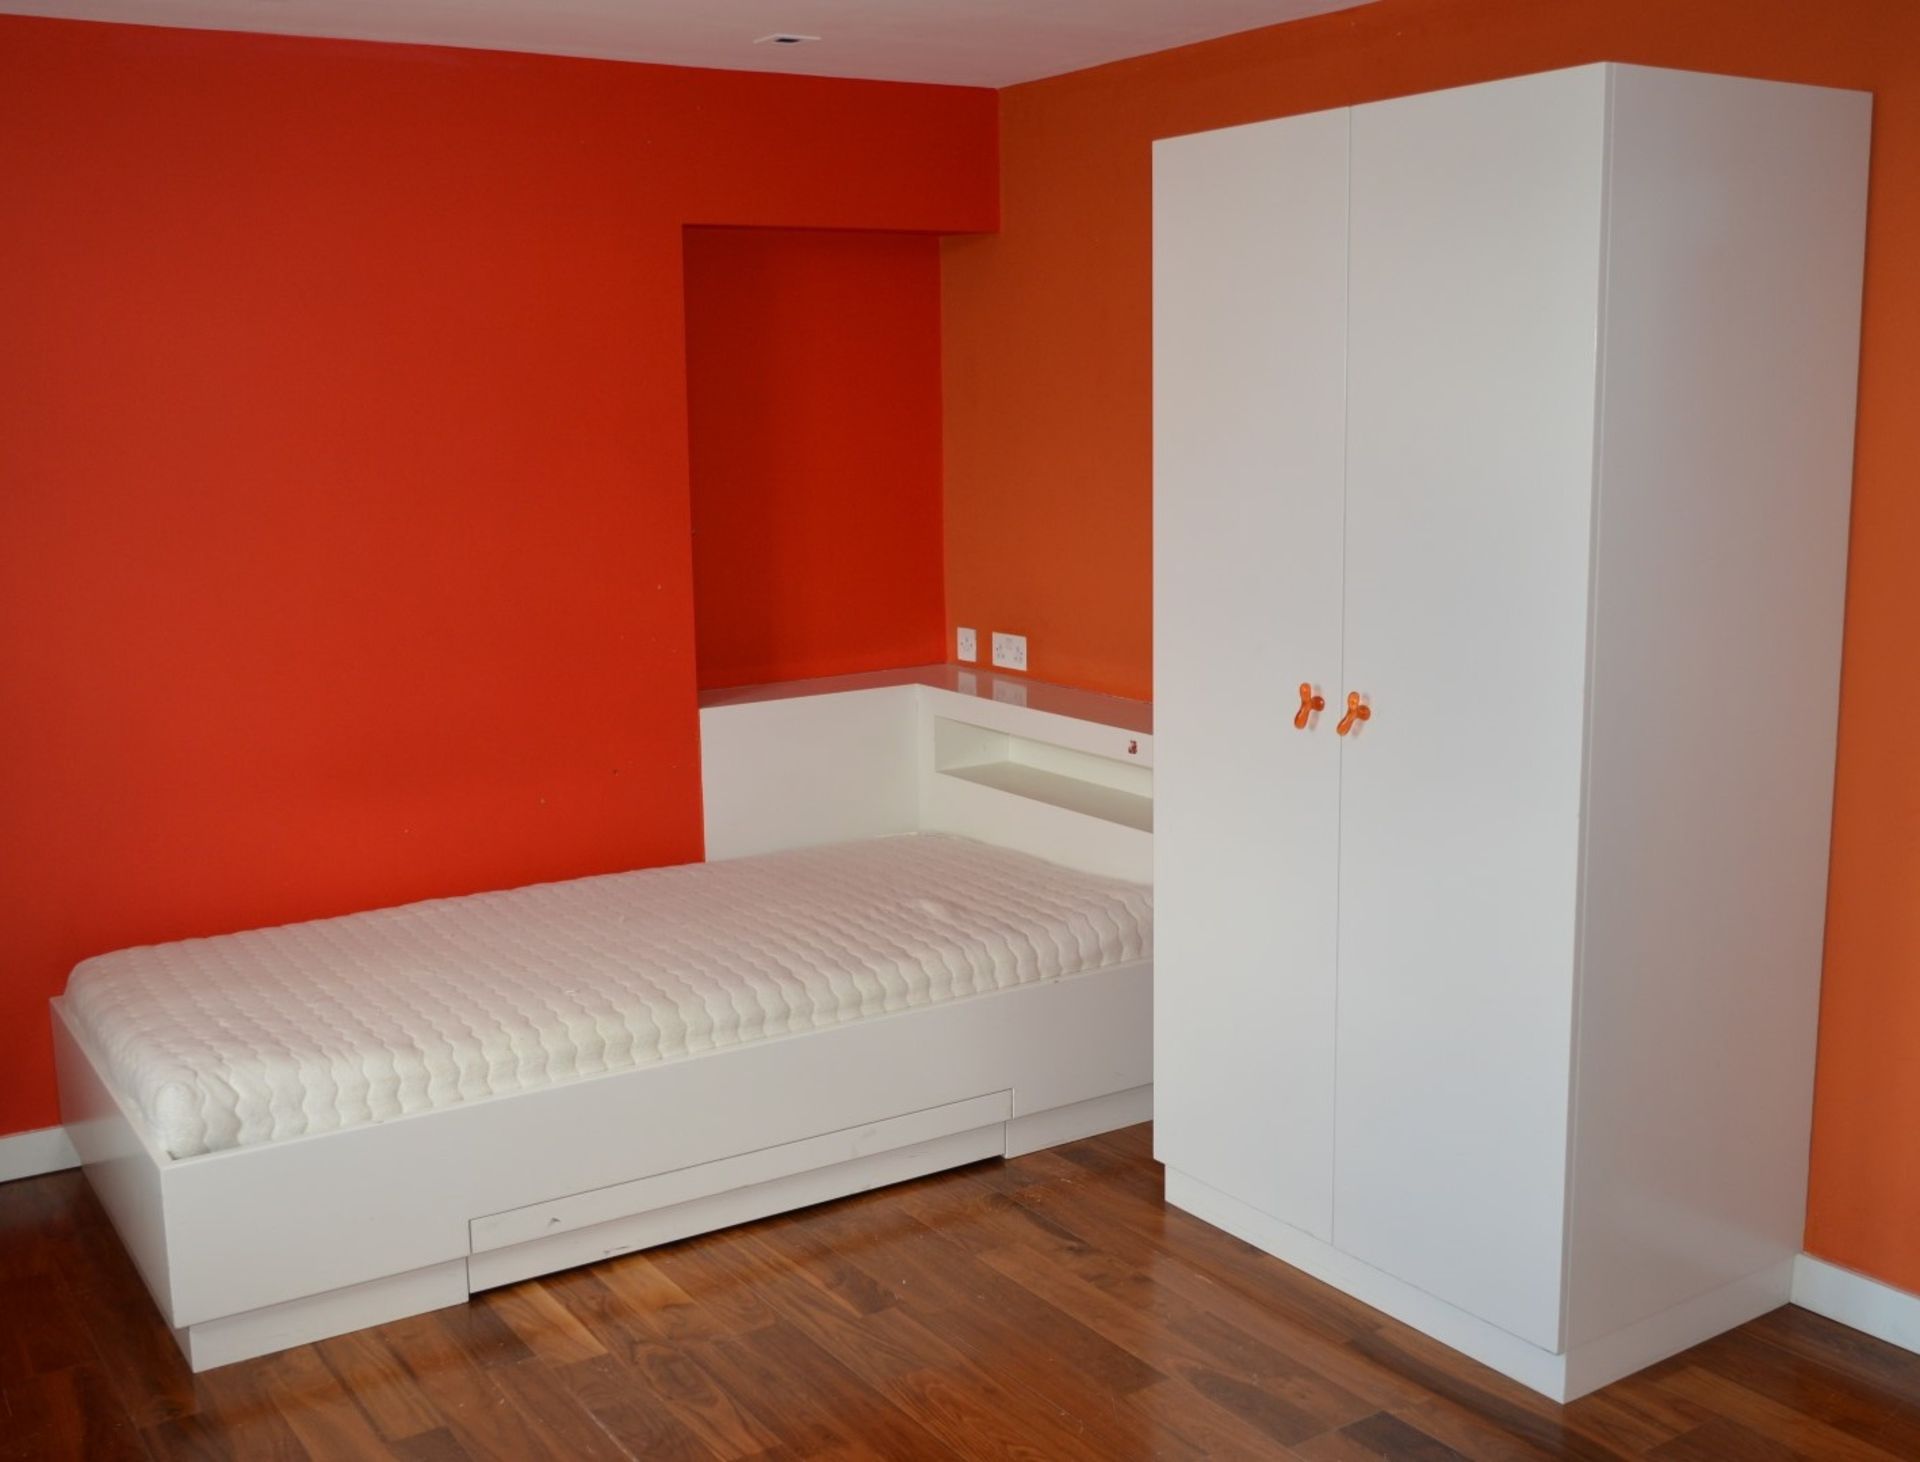 1 x Bedroom Suite Including Two Single Bed With Naturflex Slatted Base and Textiles Vertrauen